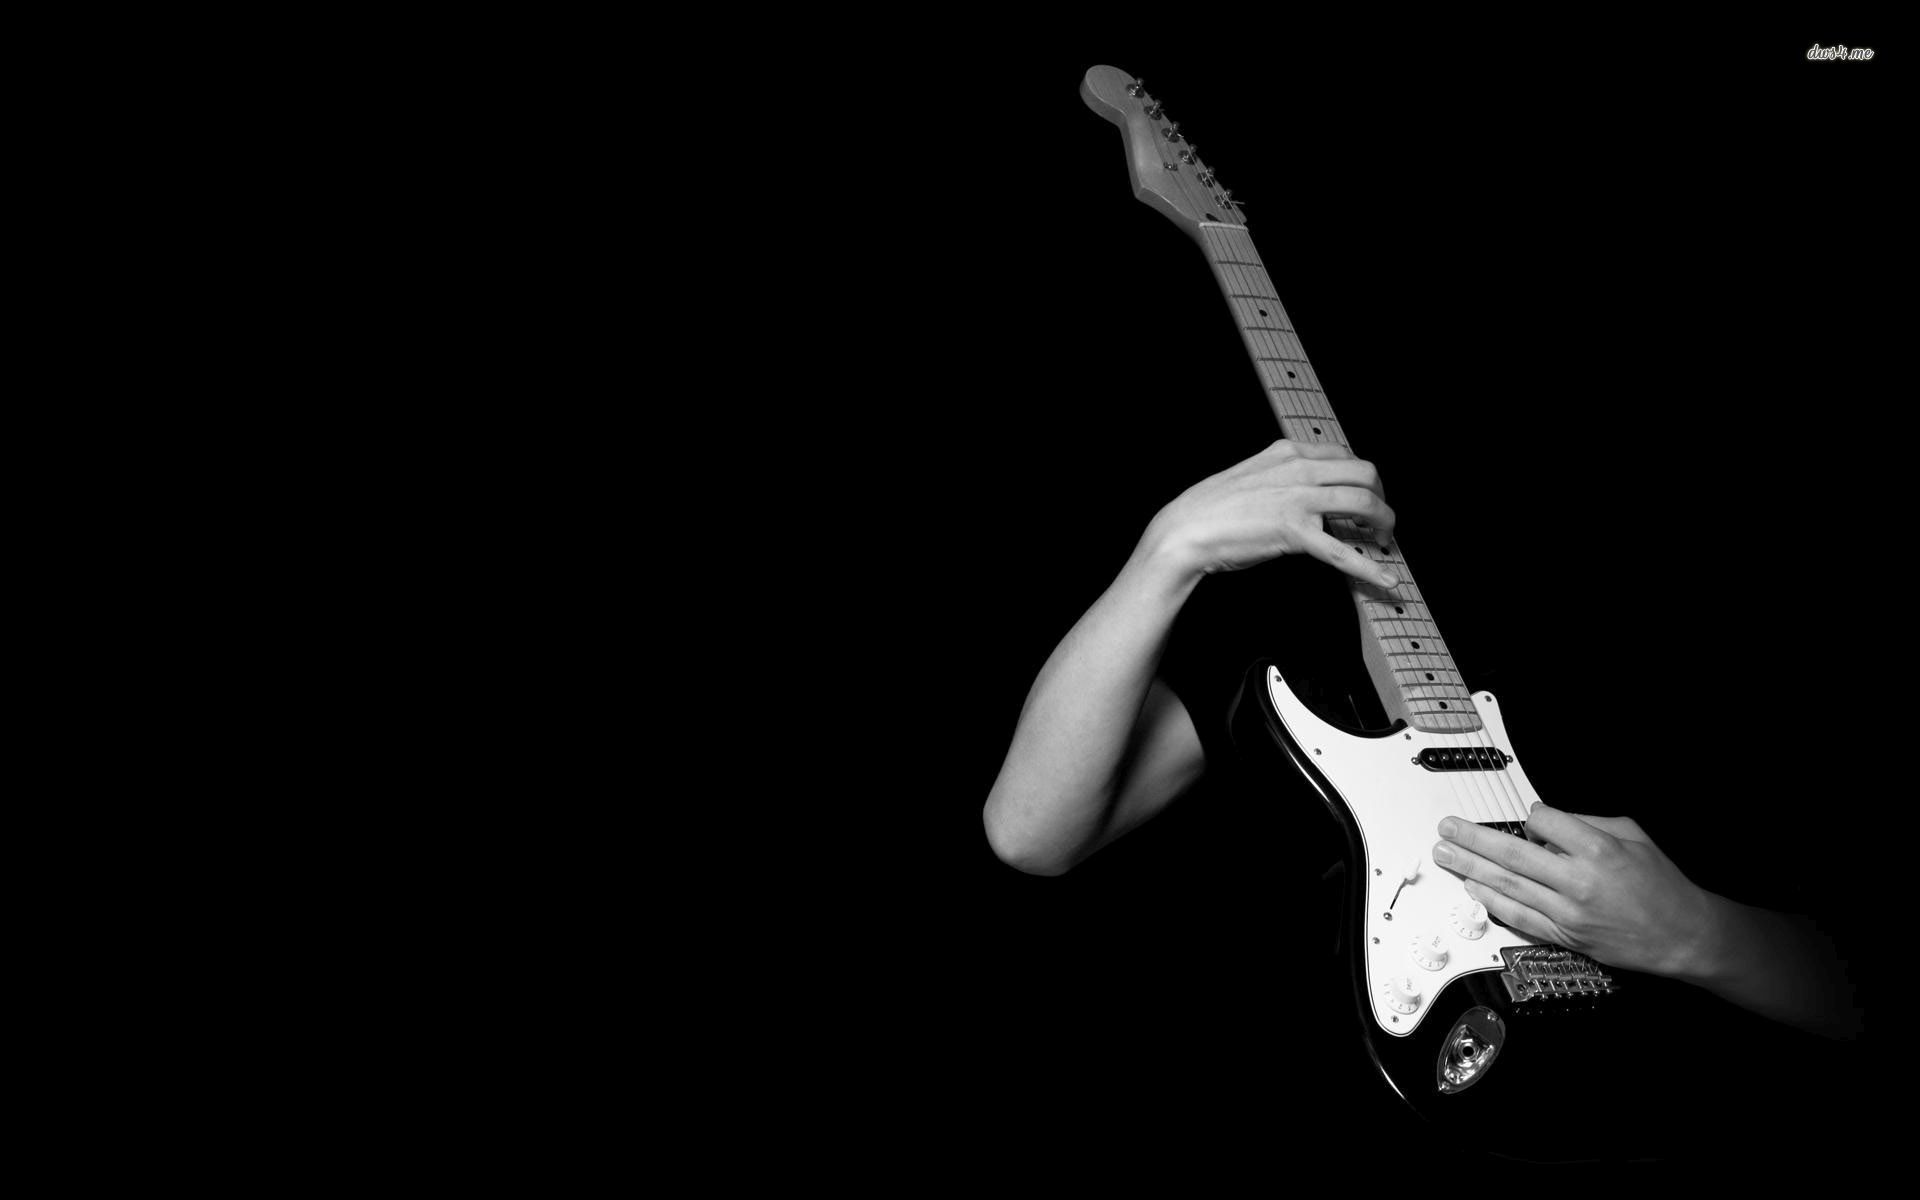 Playing the Guitar wallpaper - Music wallpapers - #29209